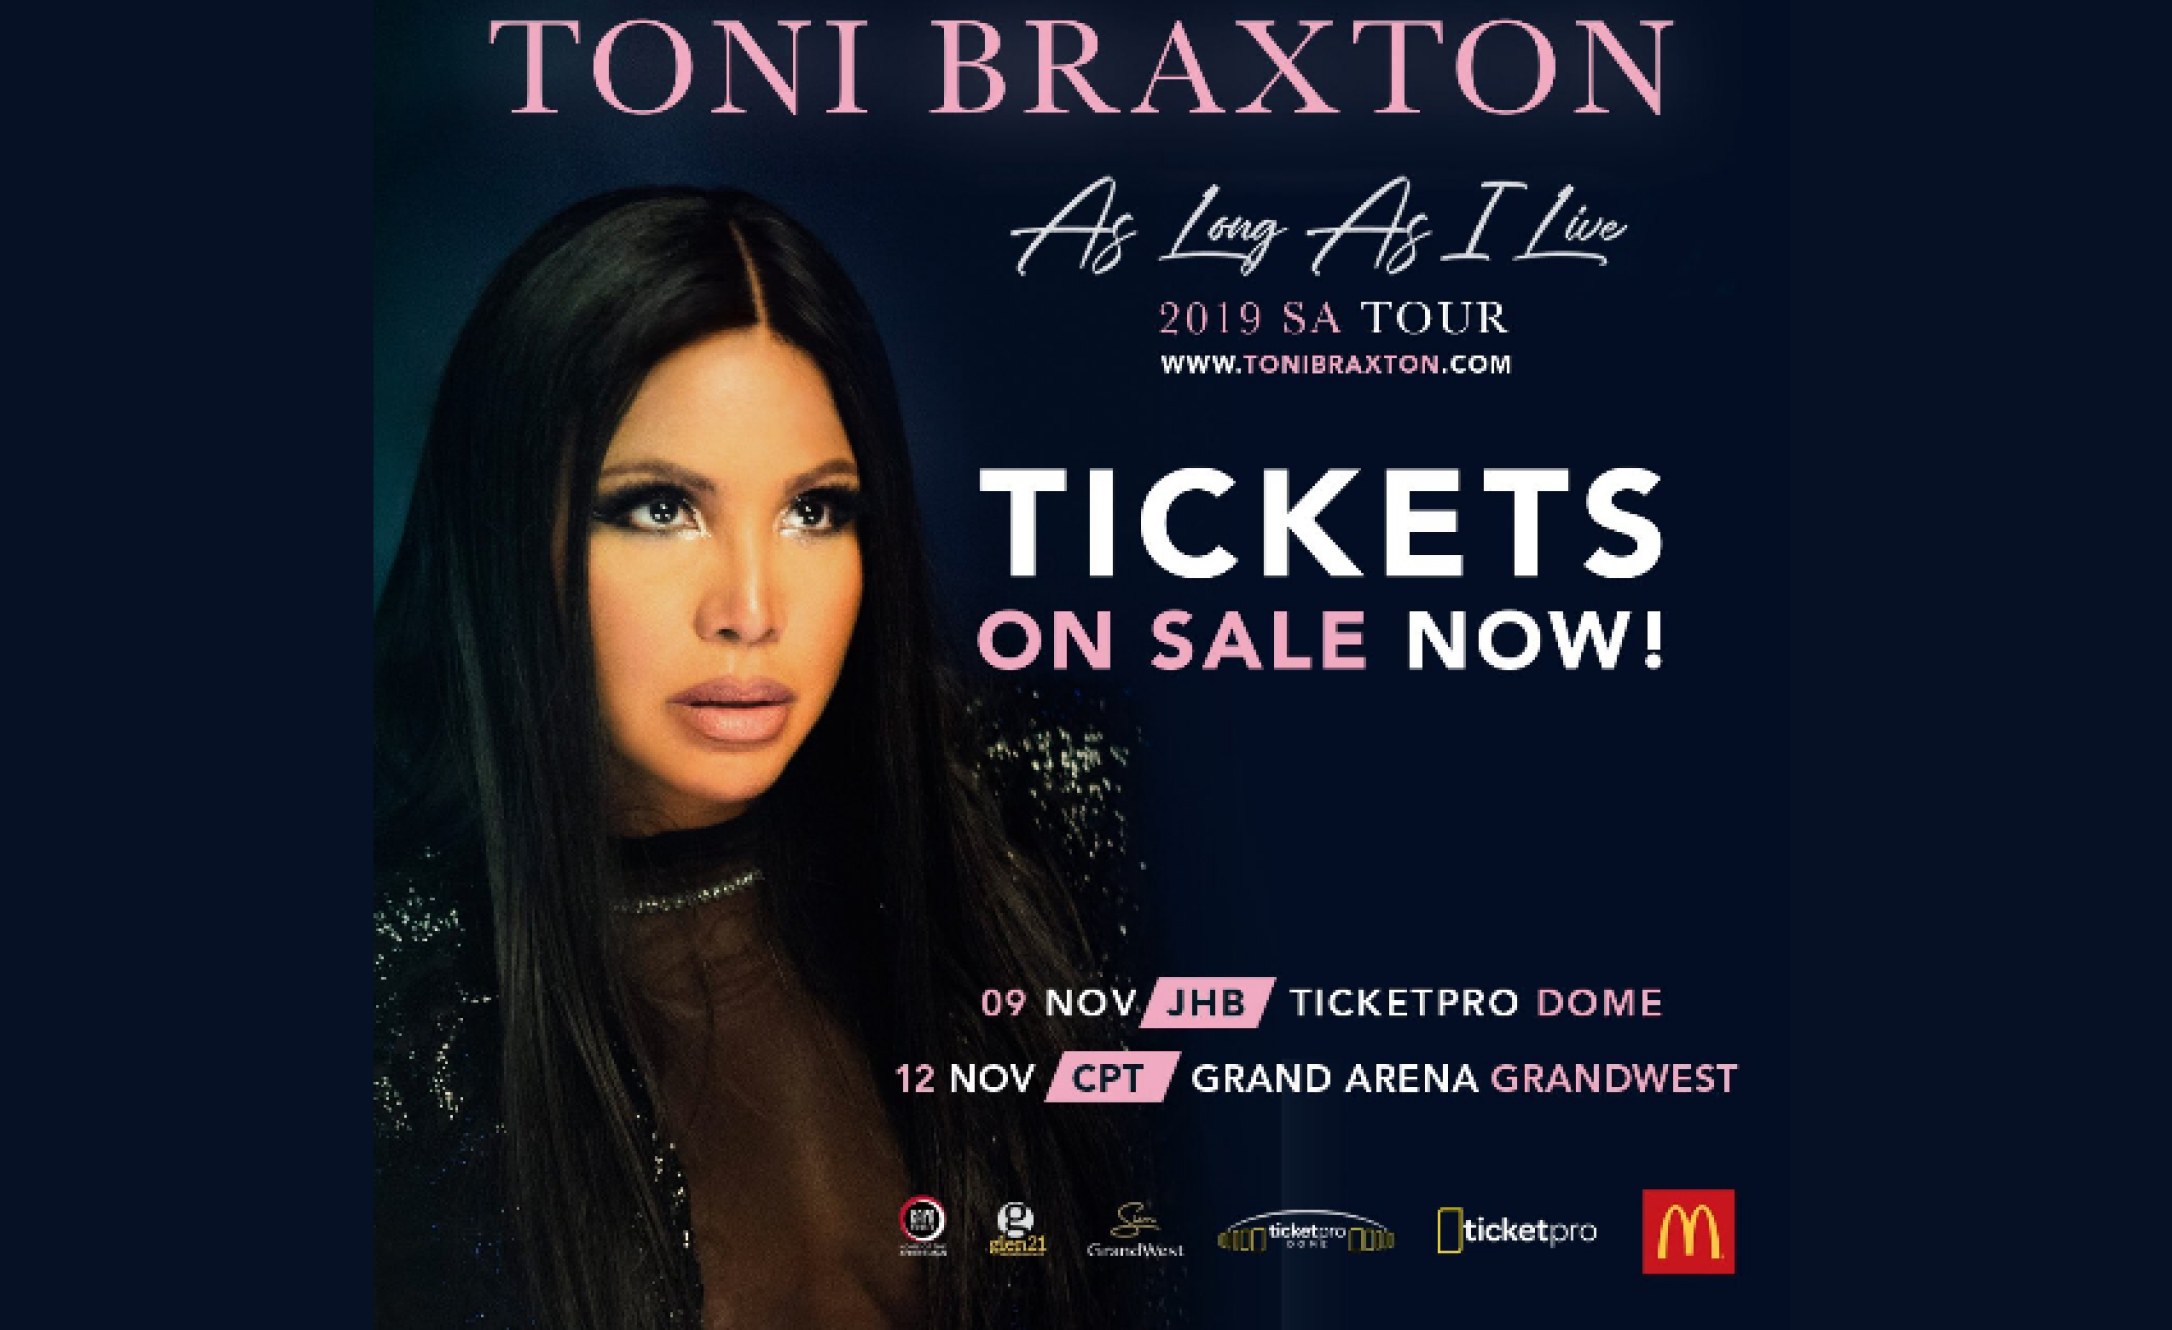 South Africa It's Official Toni Braxton is Heading Back!